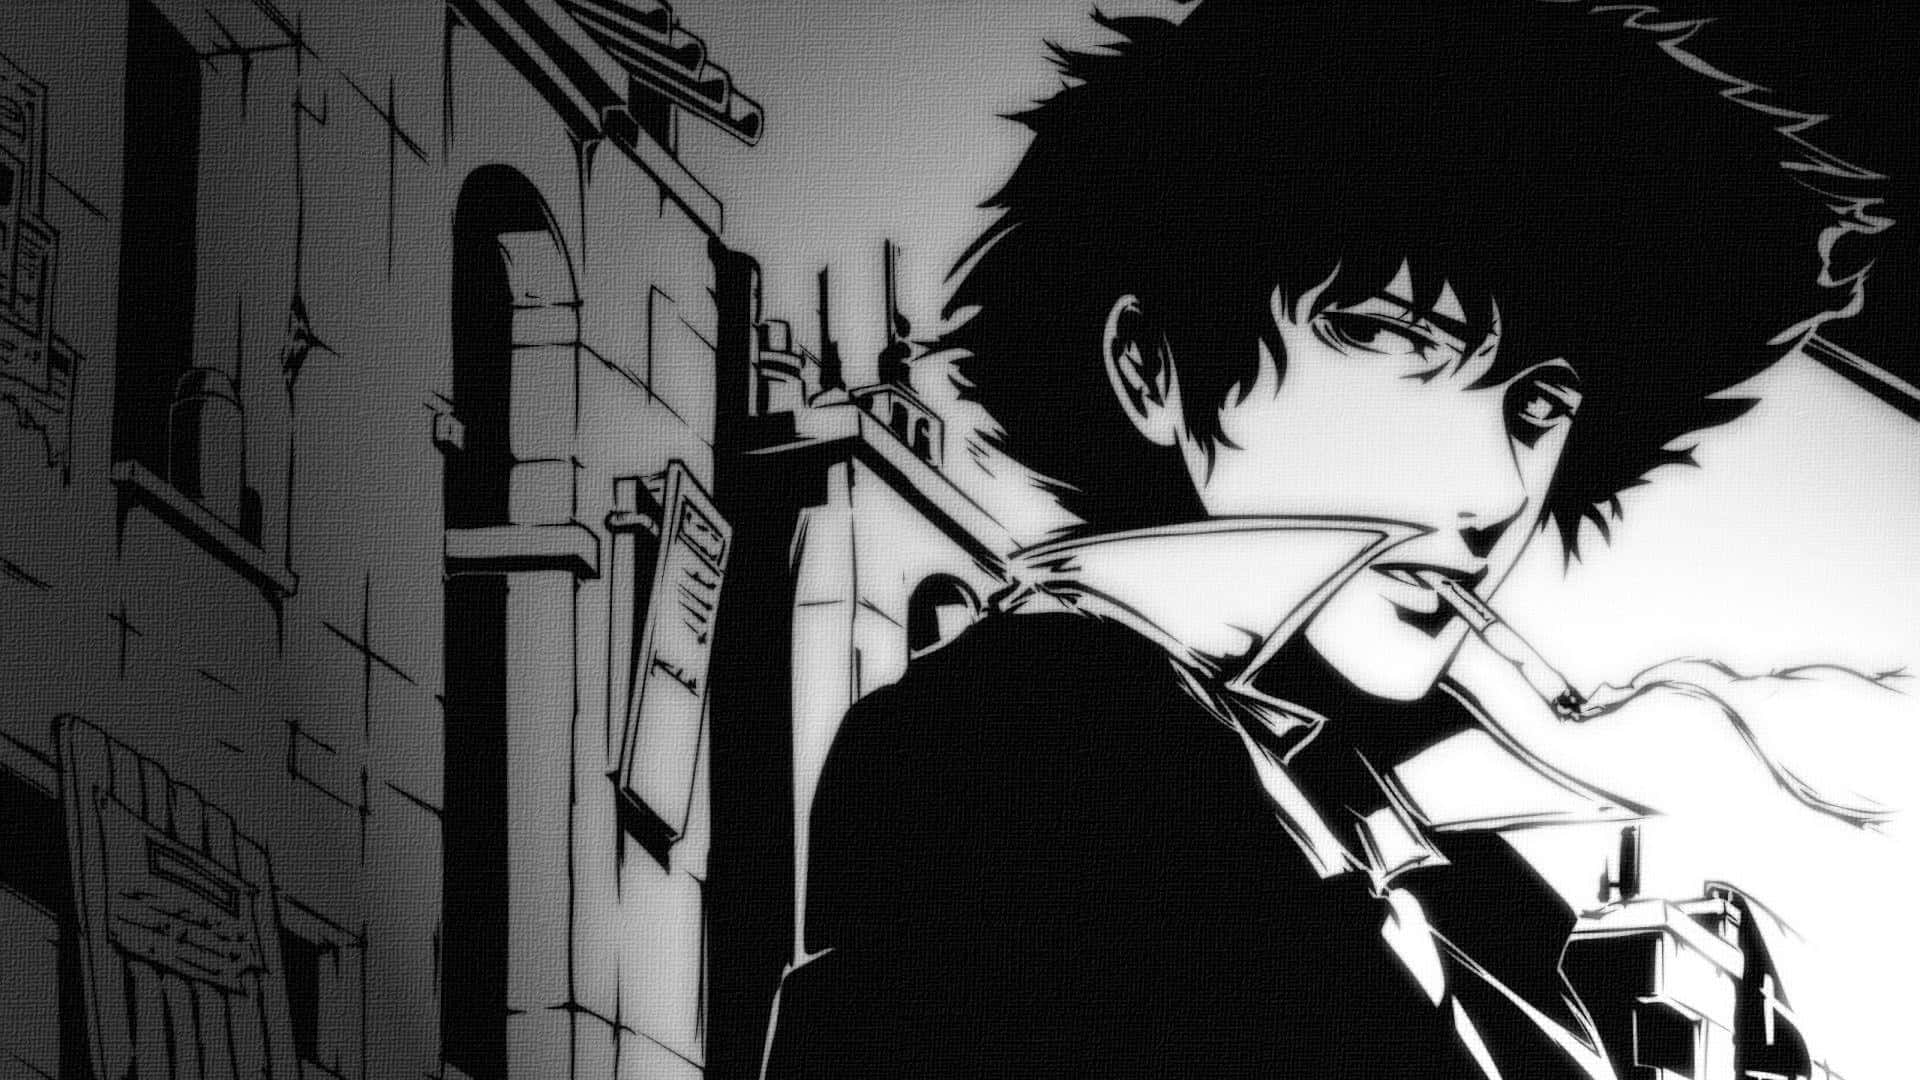 Intriguing Black and White Anime Scene